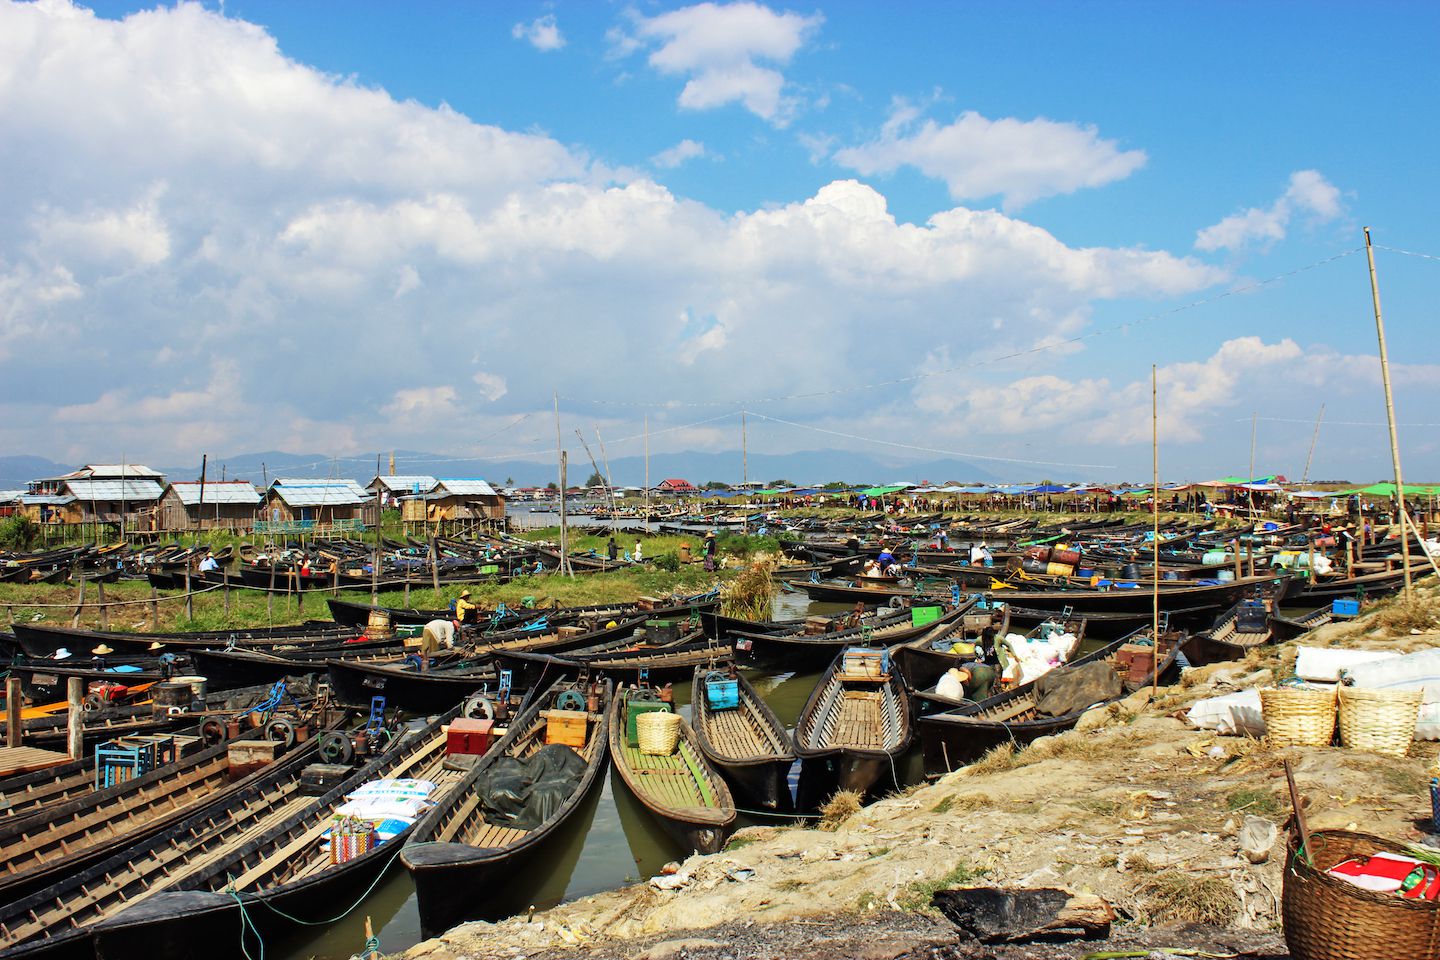 Boats at the market in Inle Lake, Myanmar